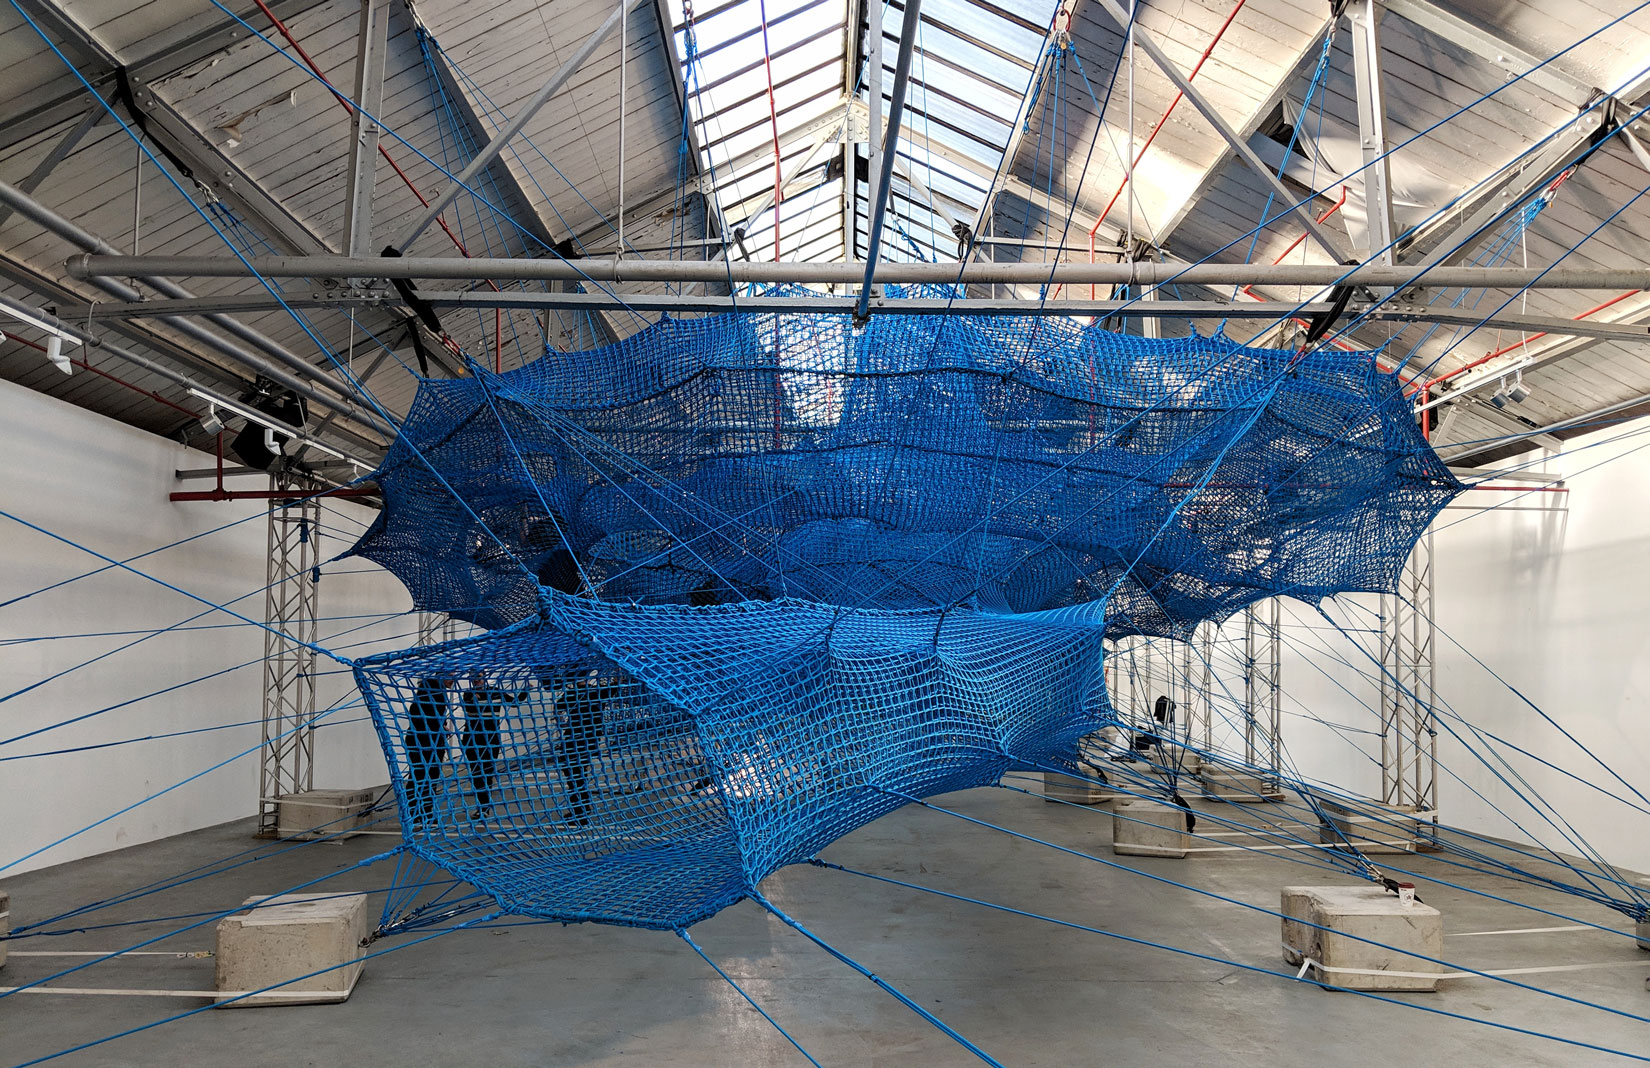 Arts collective Numen/For Use weaves a giant net inside London’s Brewer Street Car Park